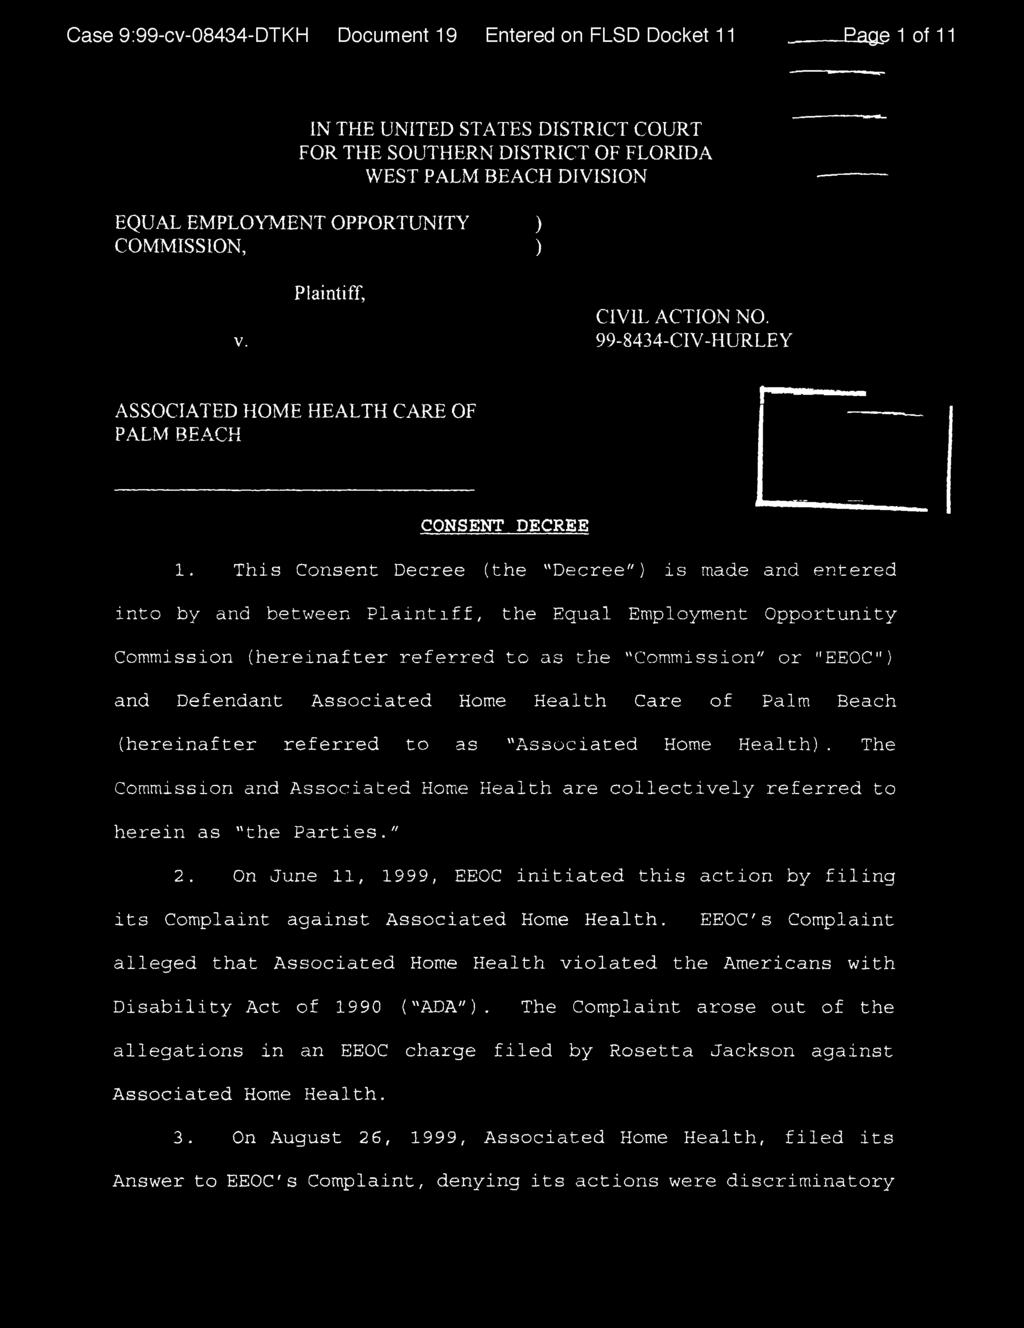 Case 9:99-cv-08434-DTKH Document 19 Entered on FLSD Docket 11 Page 1 of 11 IN THE UNITED STATES DISTRICT COURT FOR THE SOUTHERN DISTRICT OF FLORIDA WEST PALM BEACH DIVISION EQUAL EMPLOYMENT